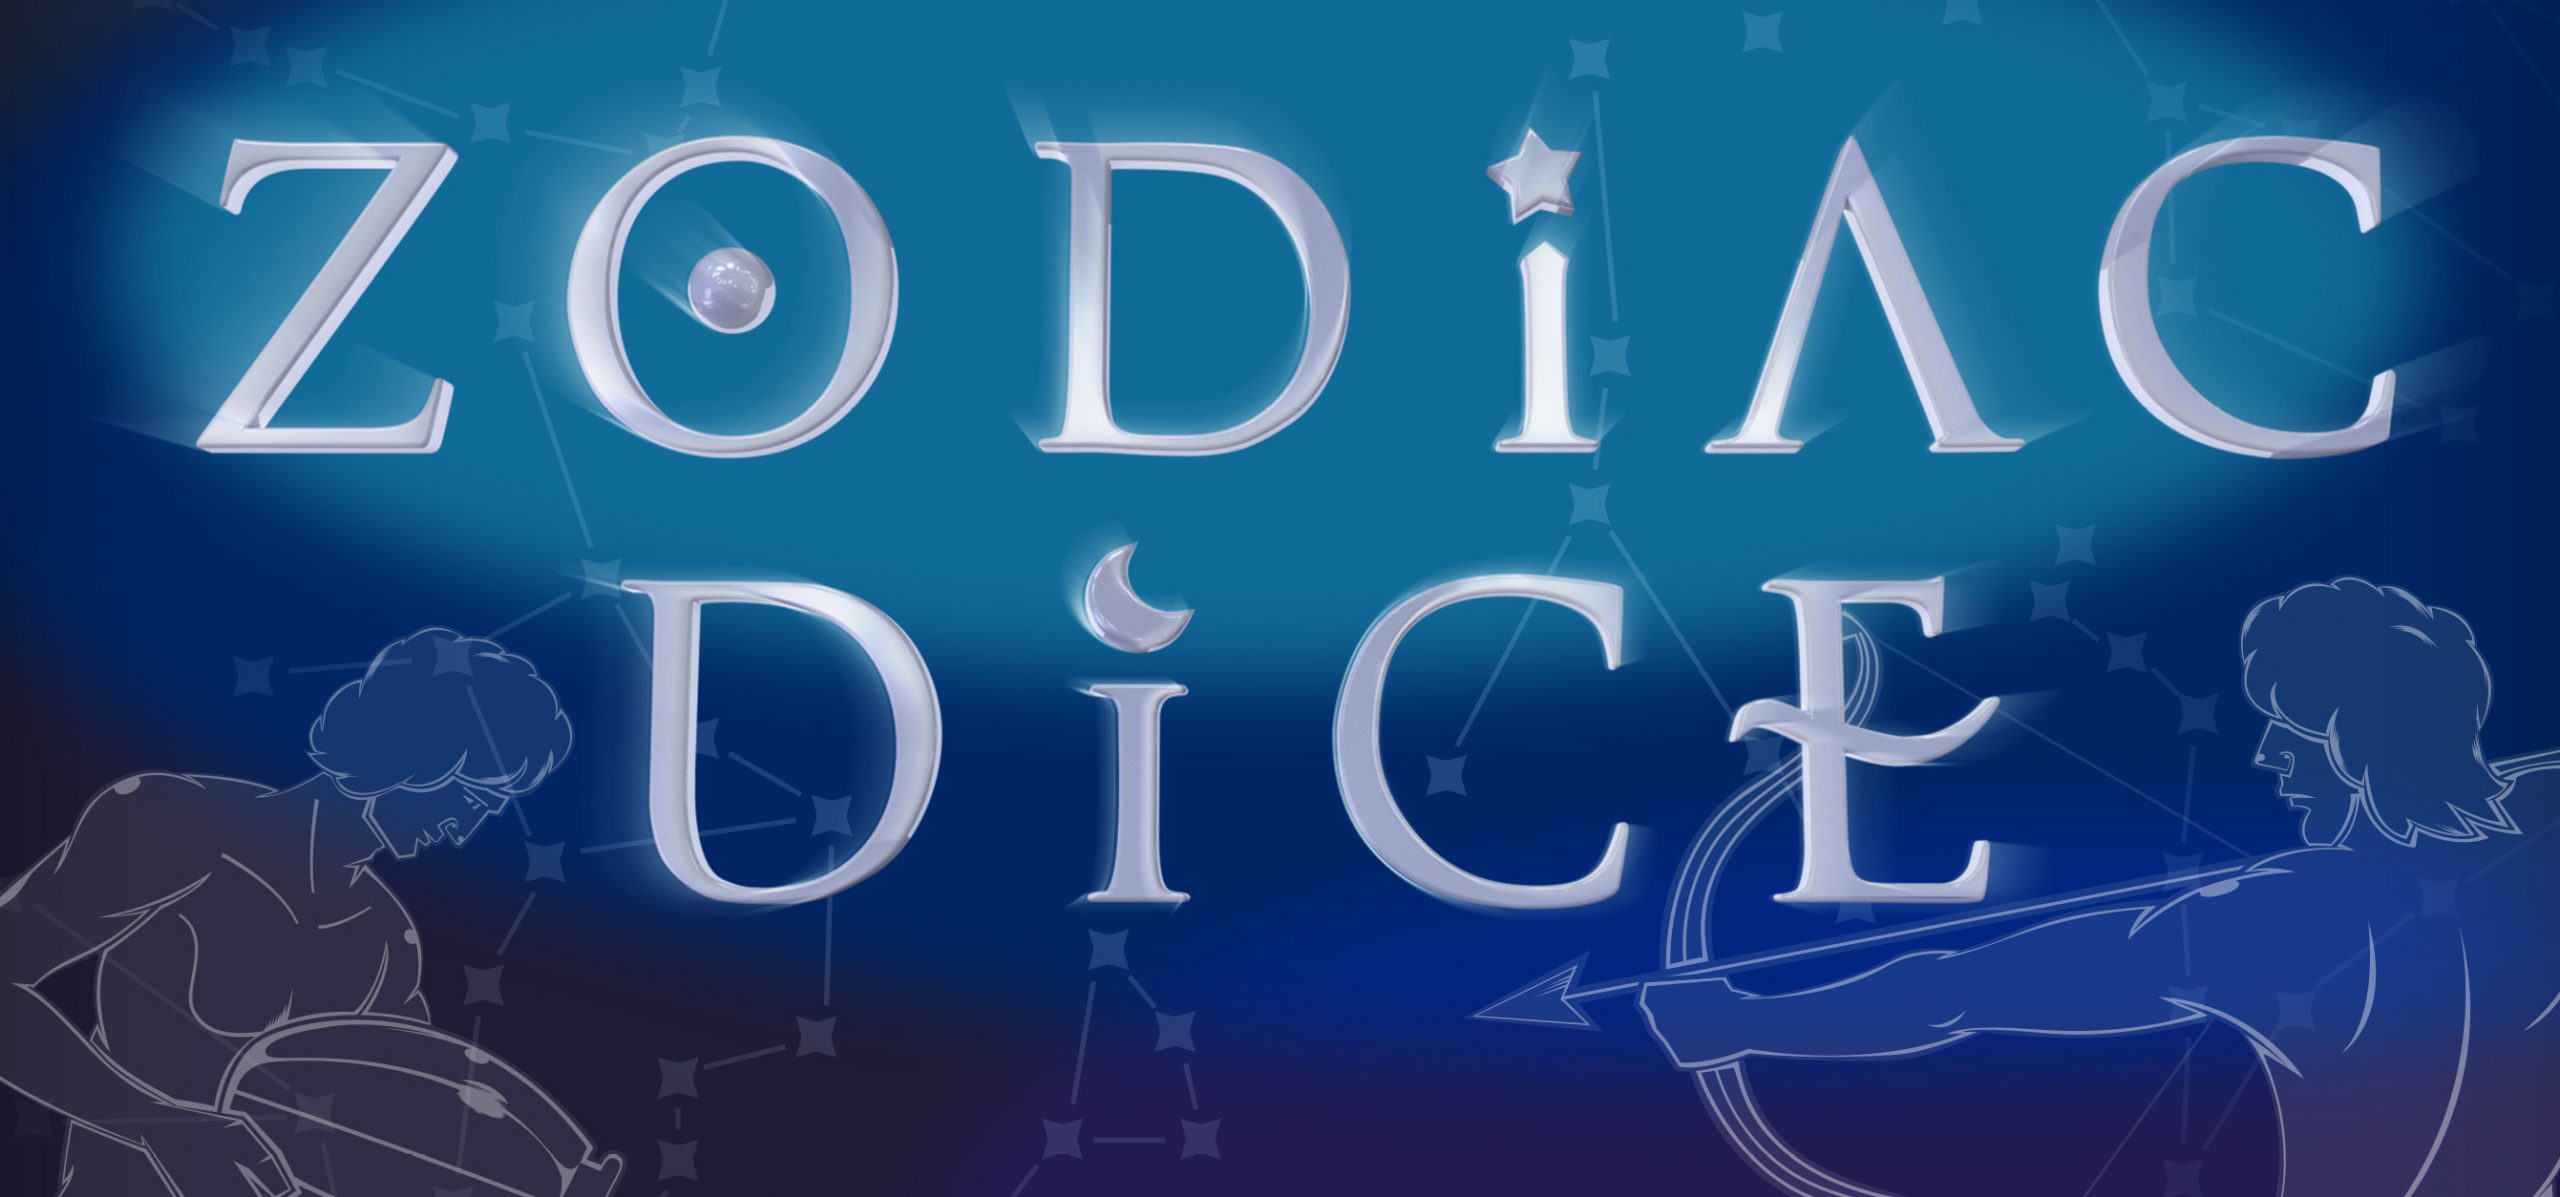 Zodiac Dice - the new astrological dice game from betFIRST Casino